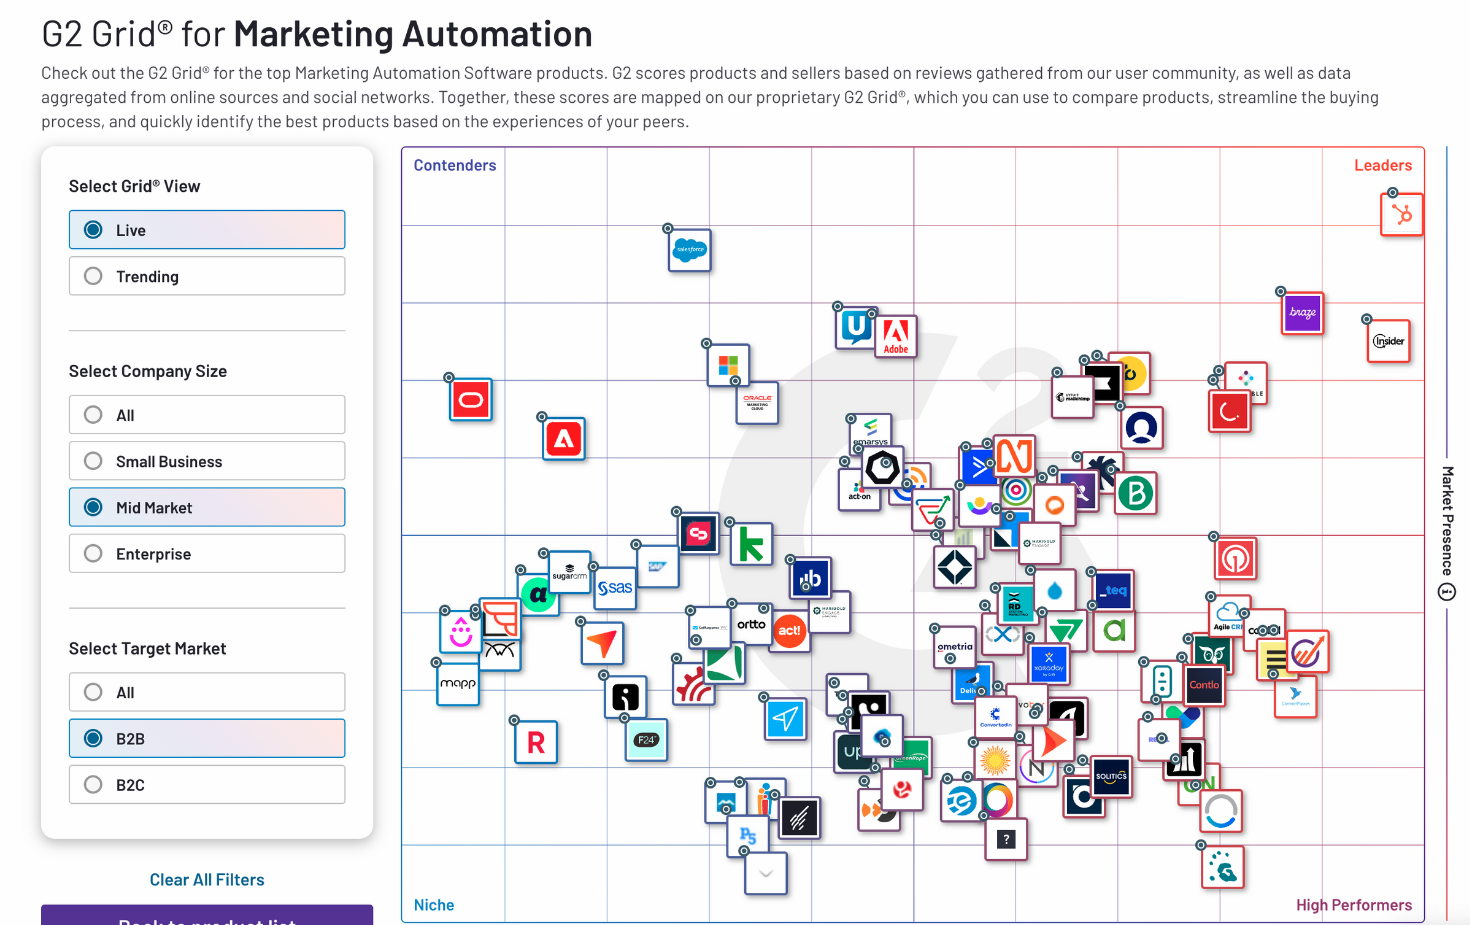 HubSpot and Marketo's race on G2